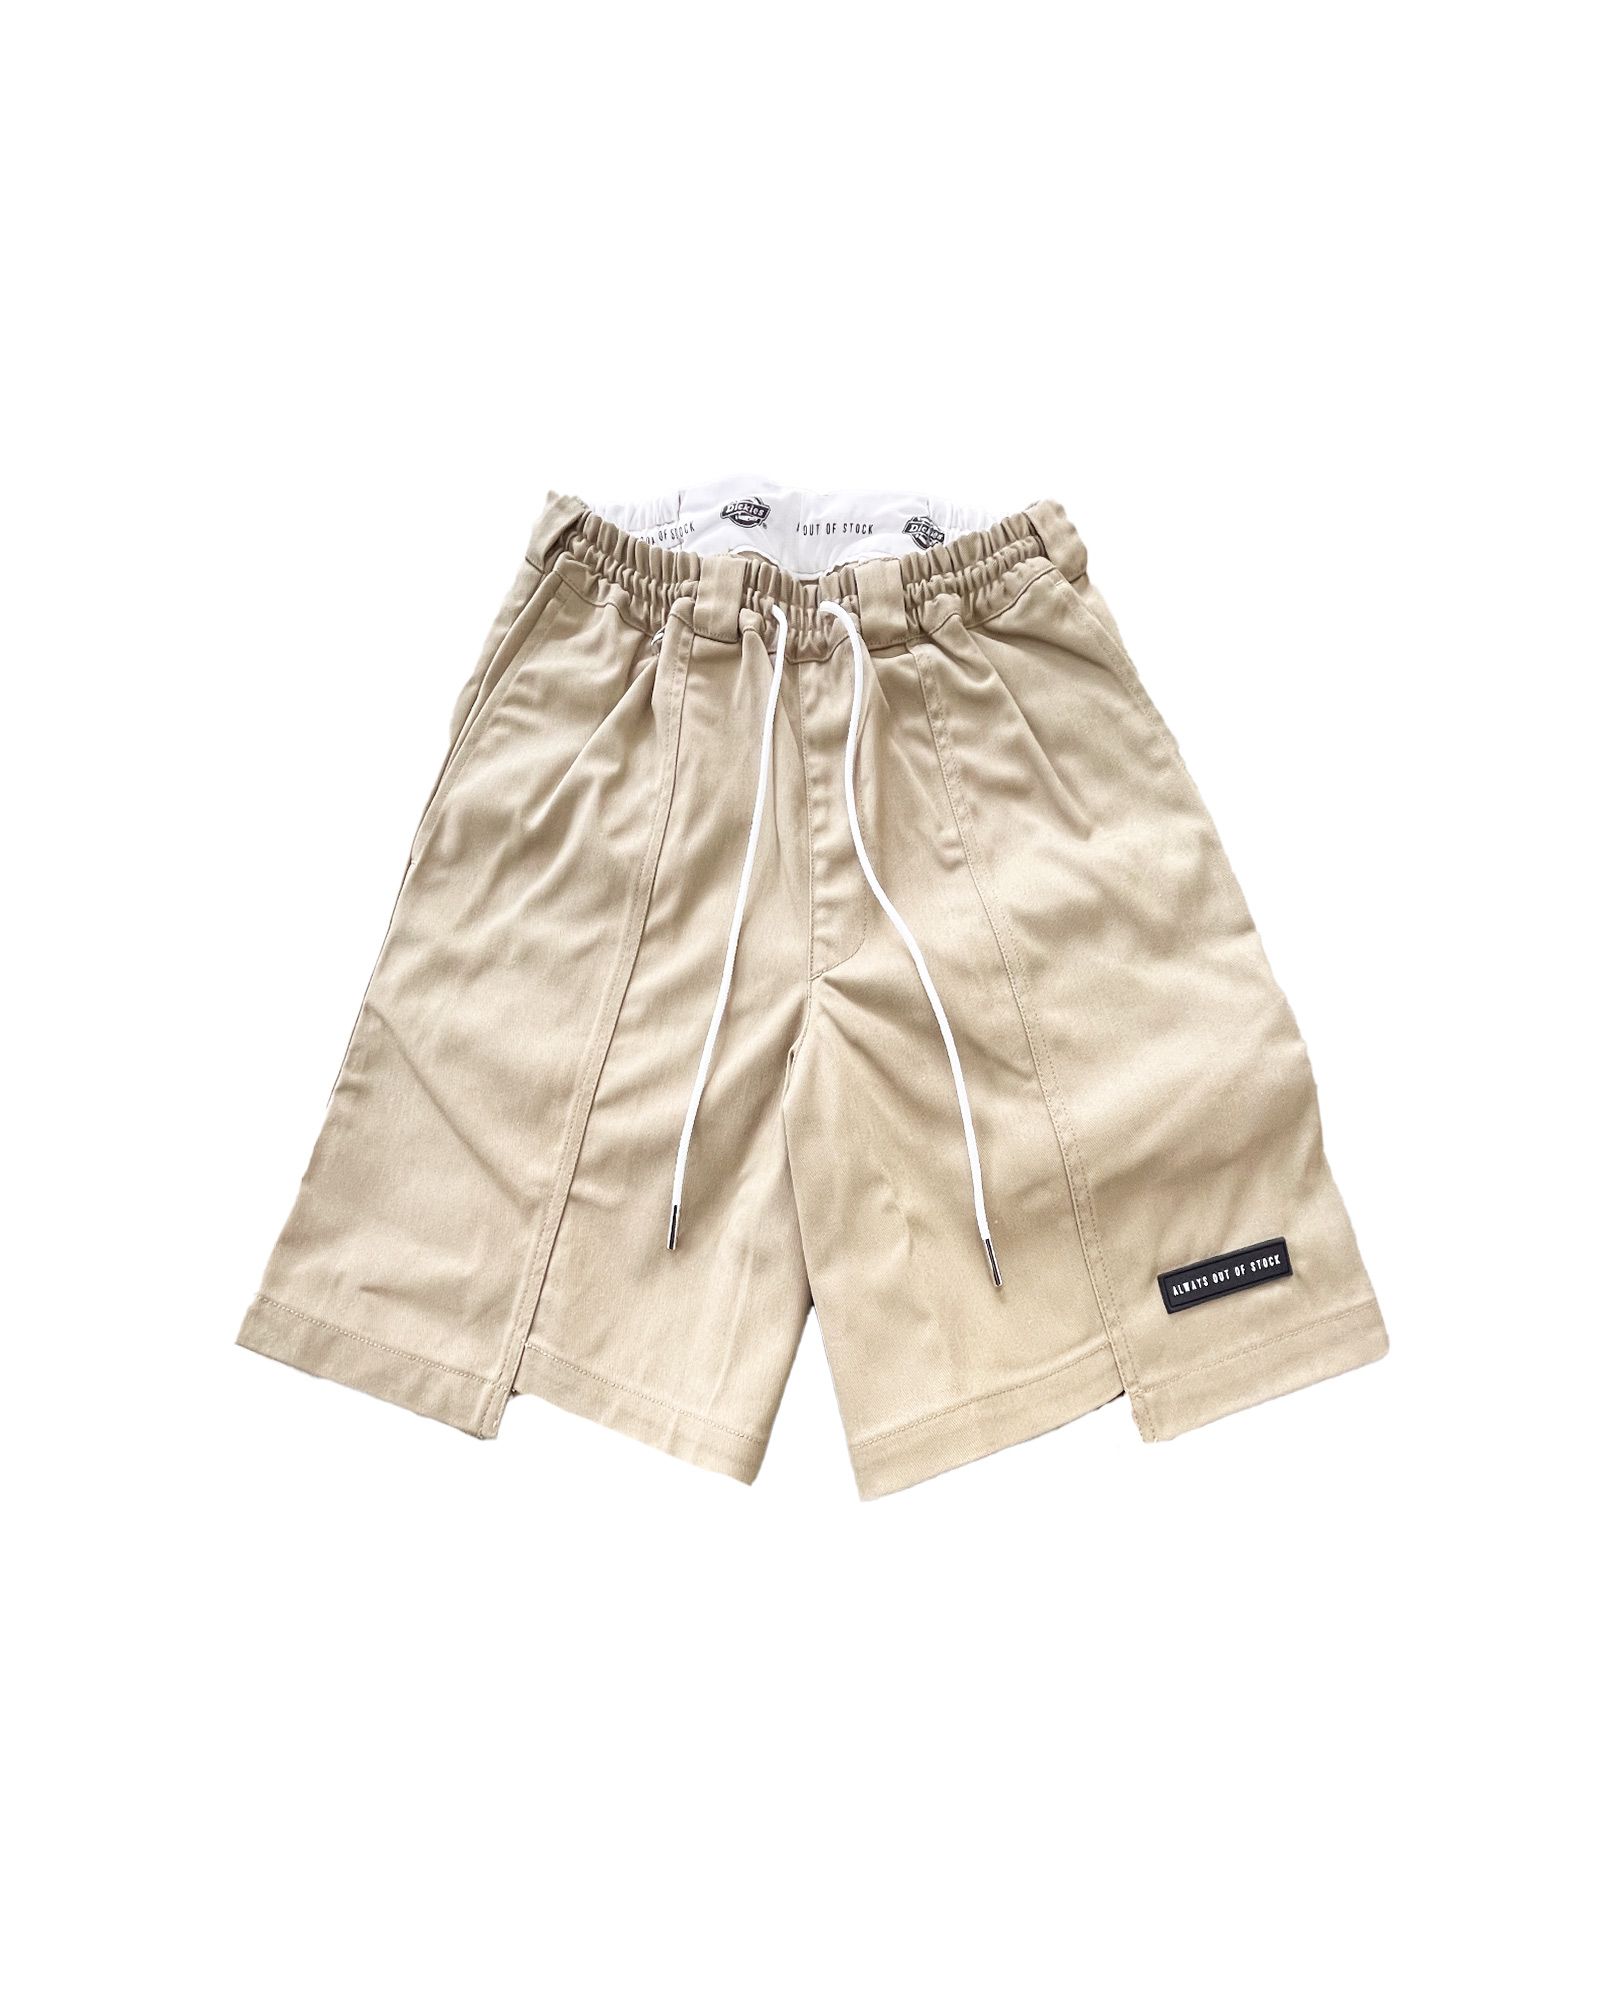 ALWAYS OUT OF STOCK - Always out of stock × Dickies switched shorts